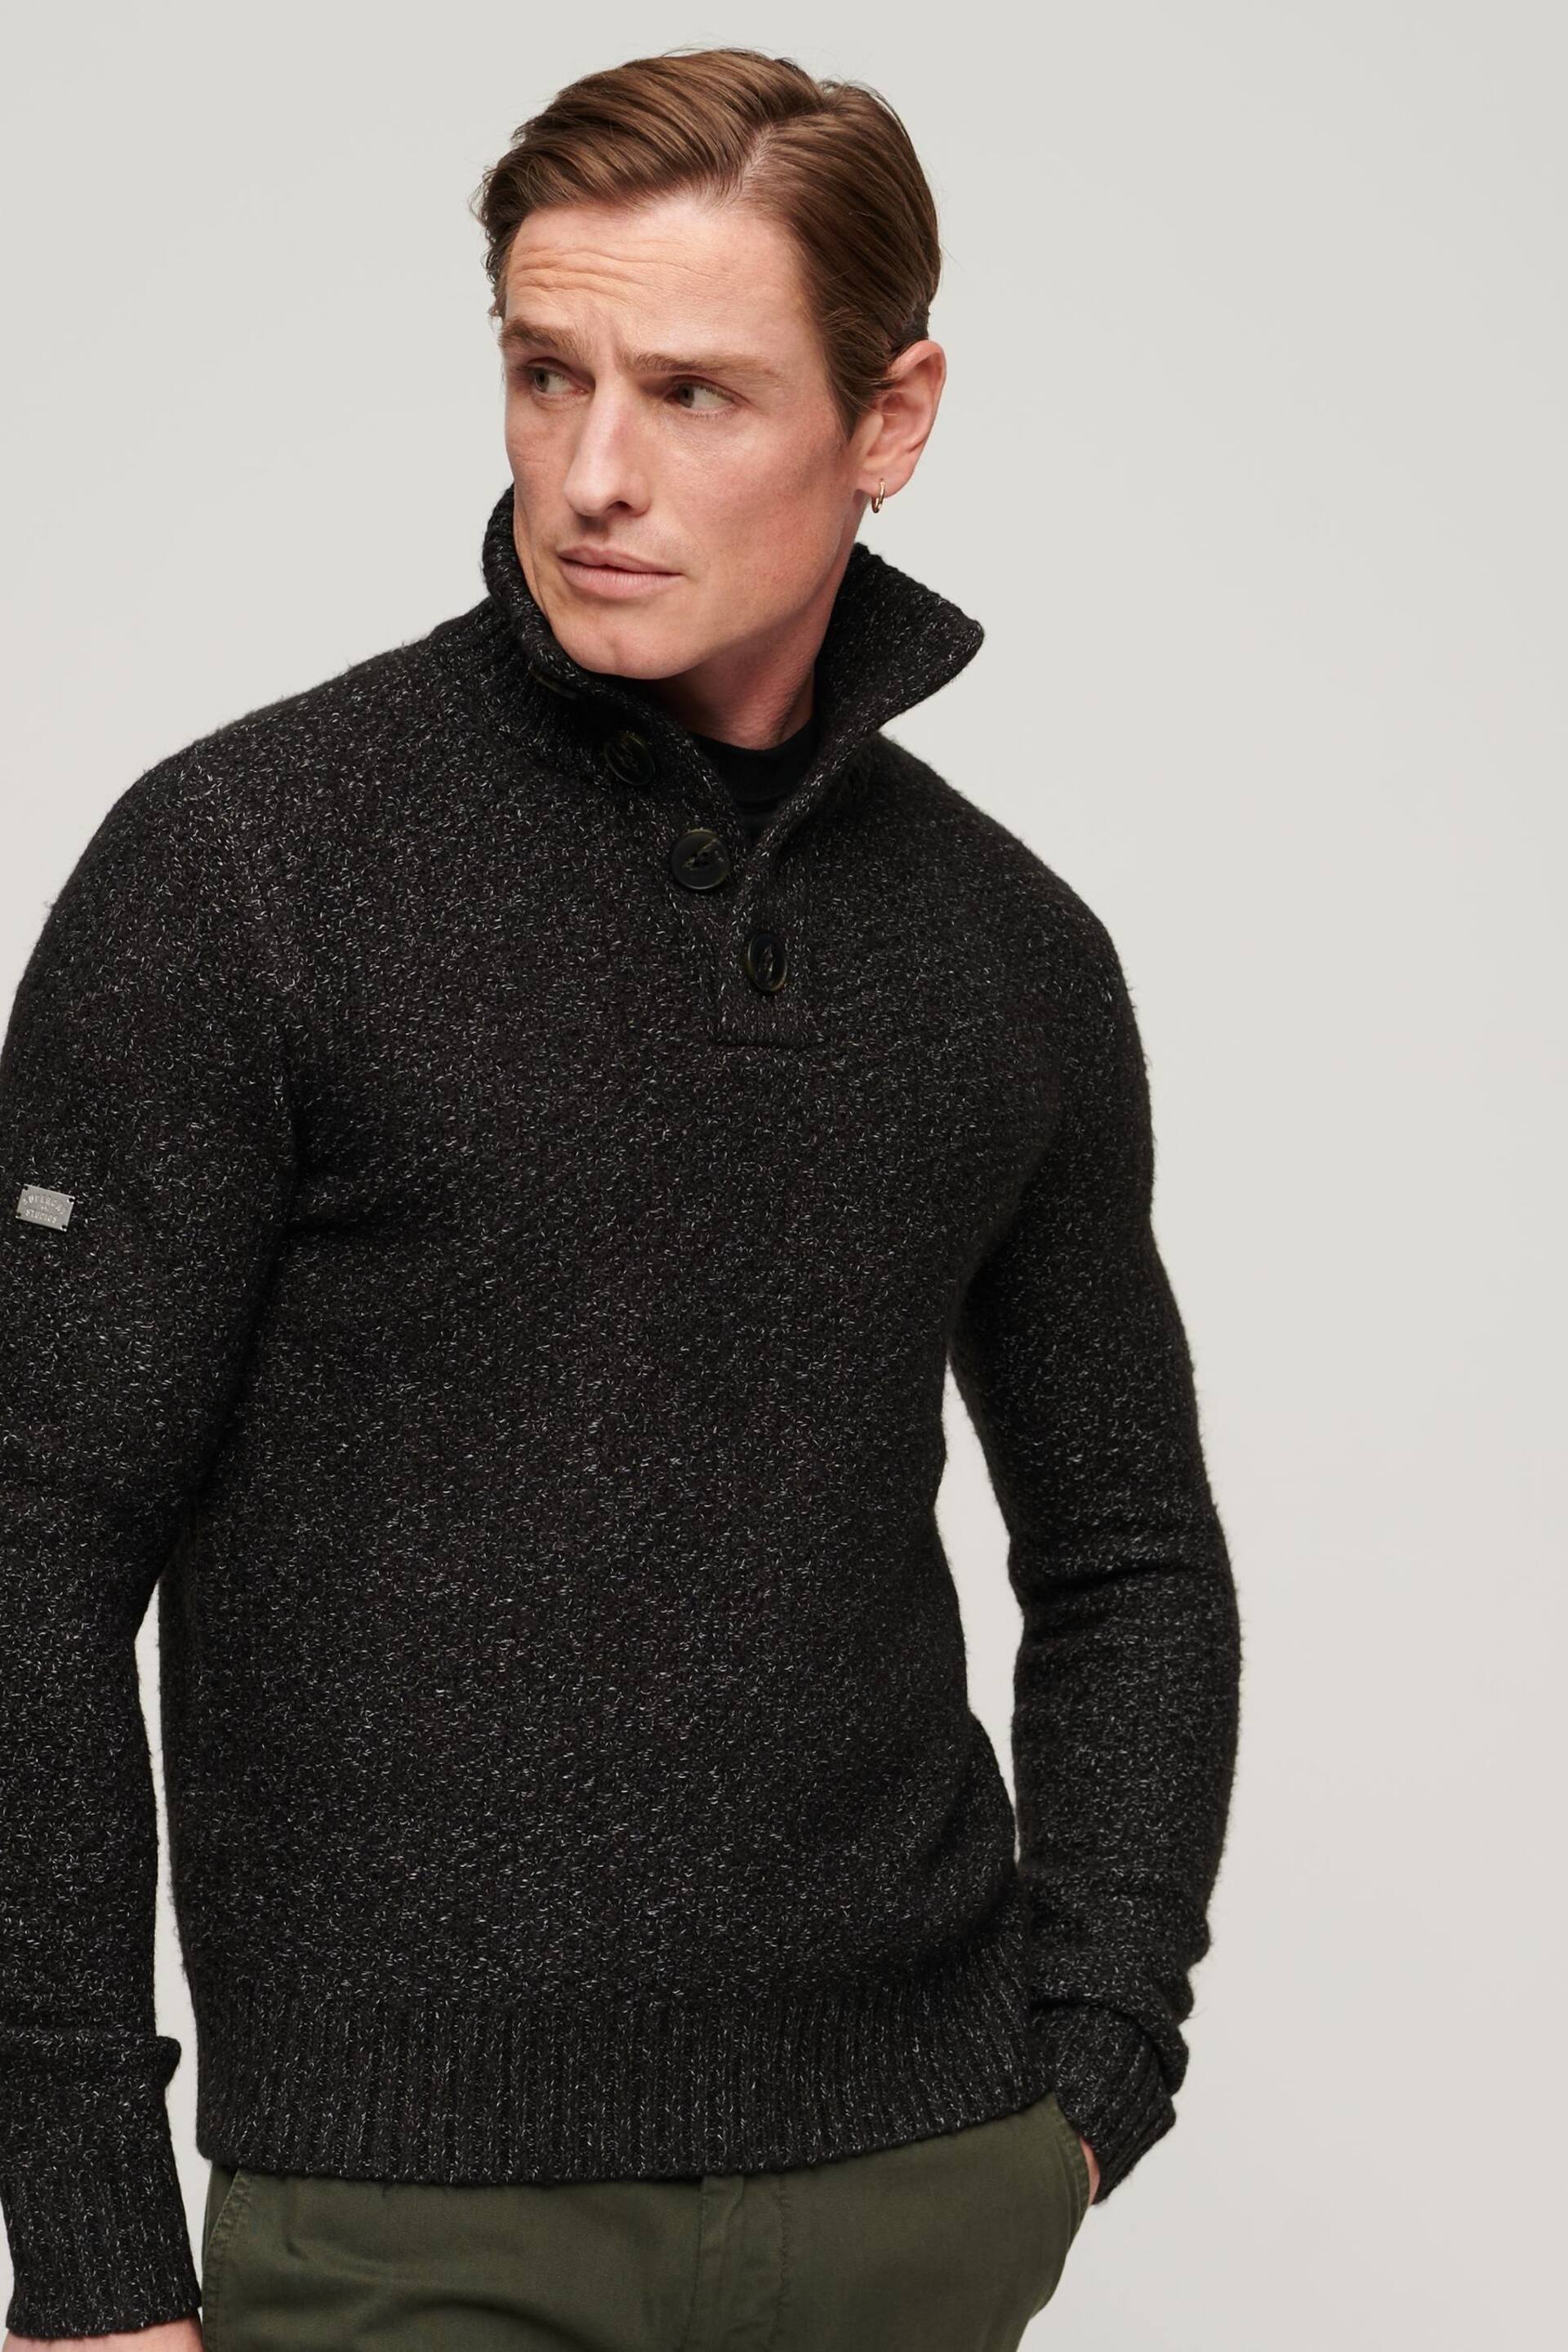 Superdry Black Chunky Button High Neck Jumper - Image 1 of 6